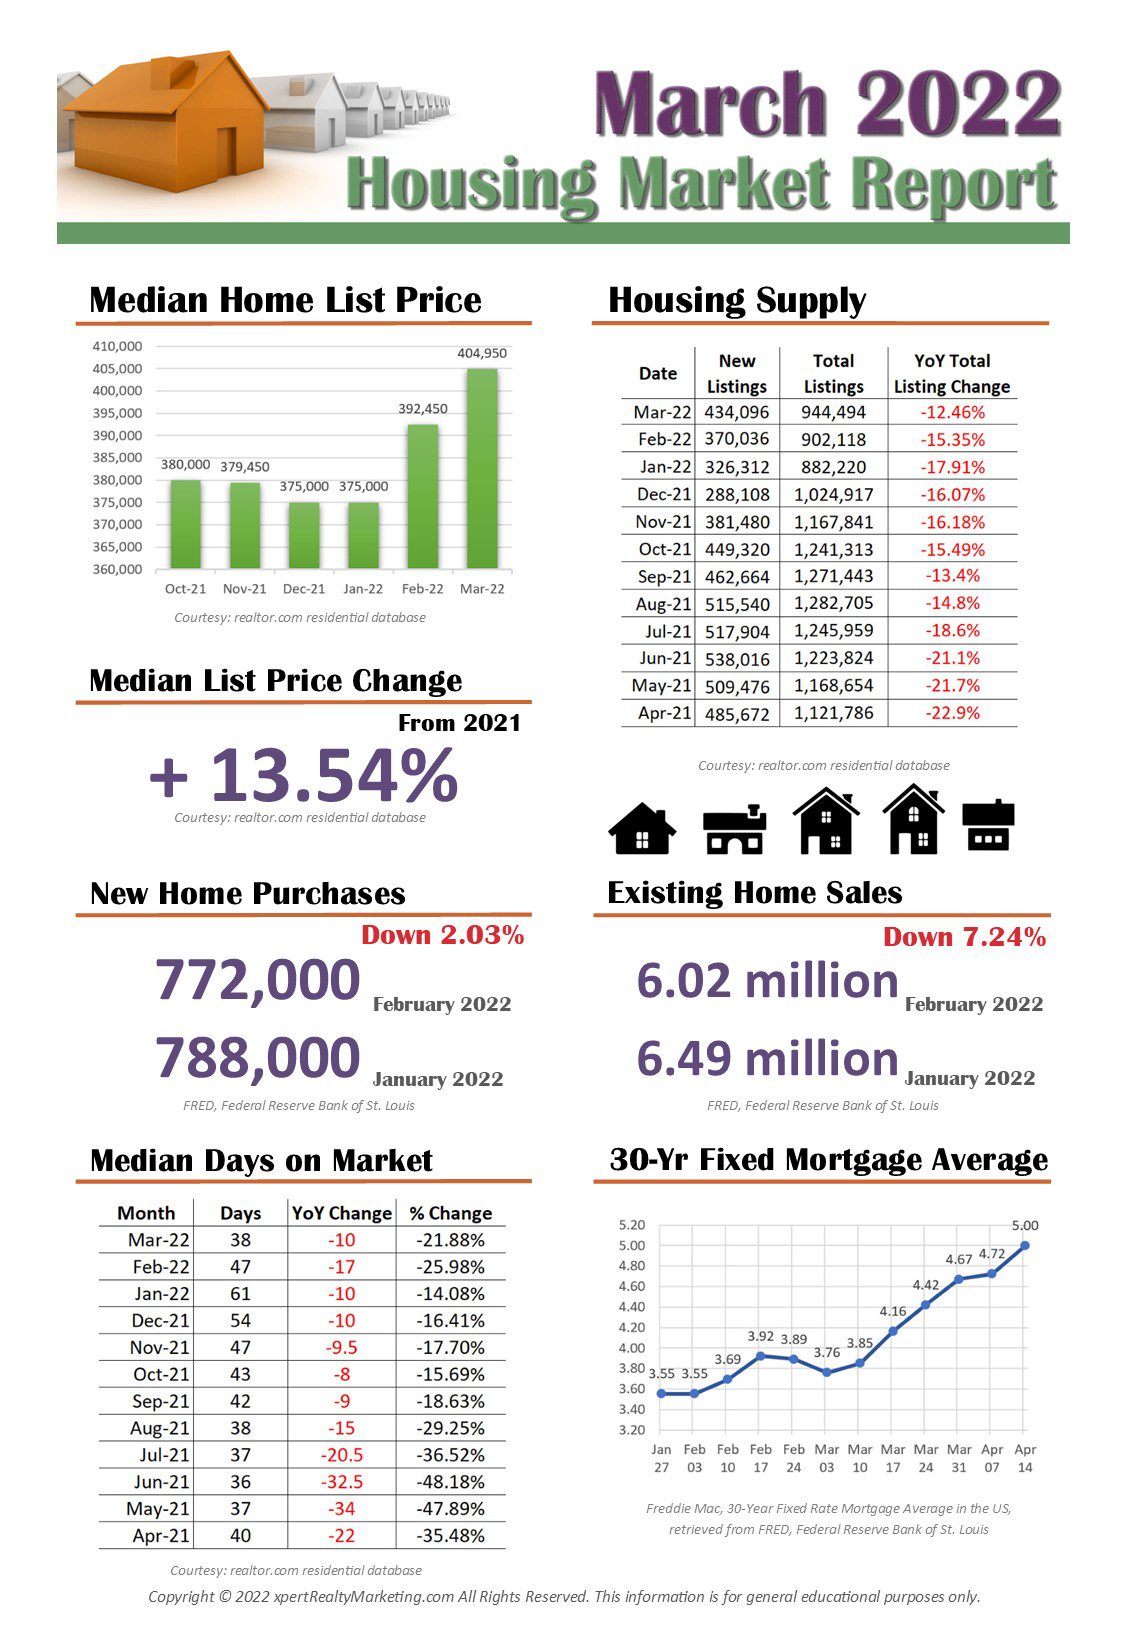 March National Housing Market Report